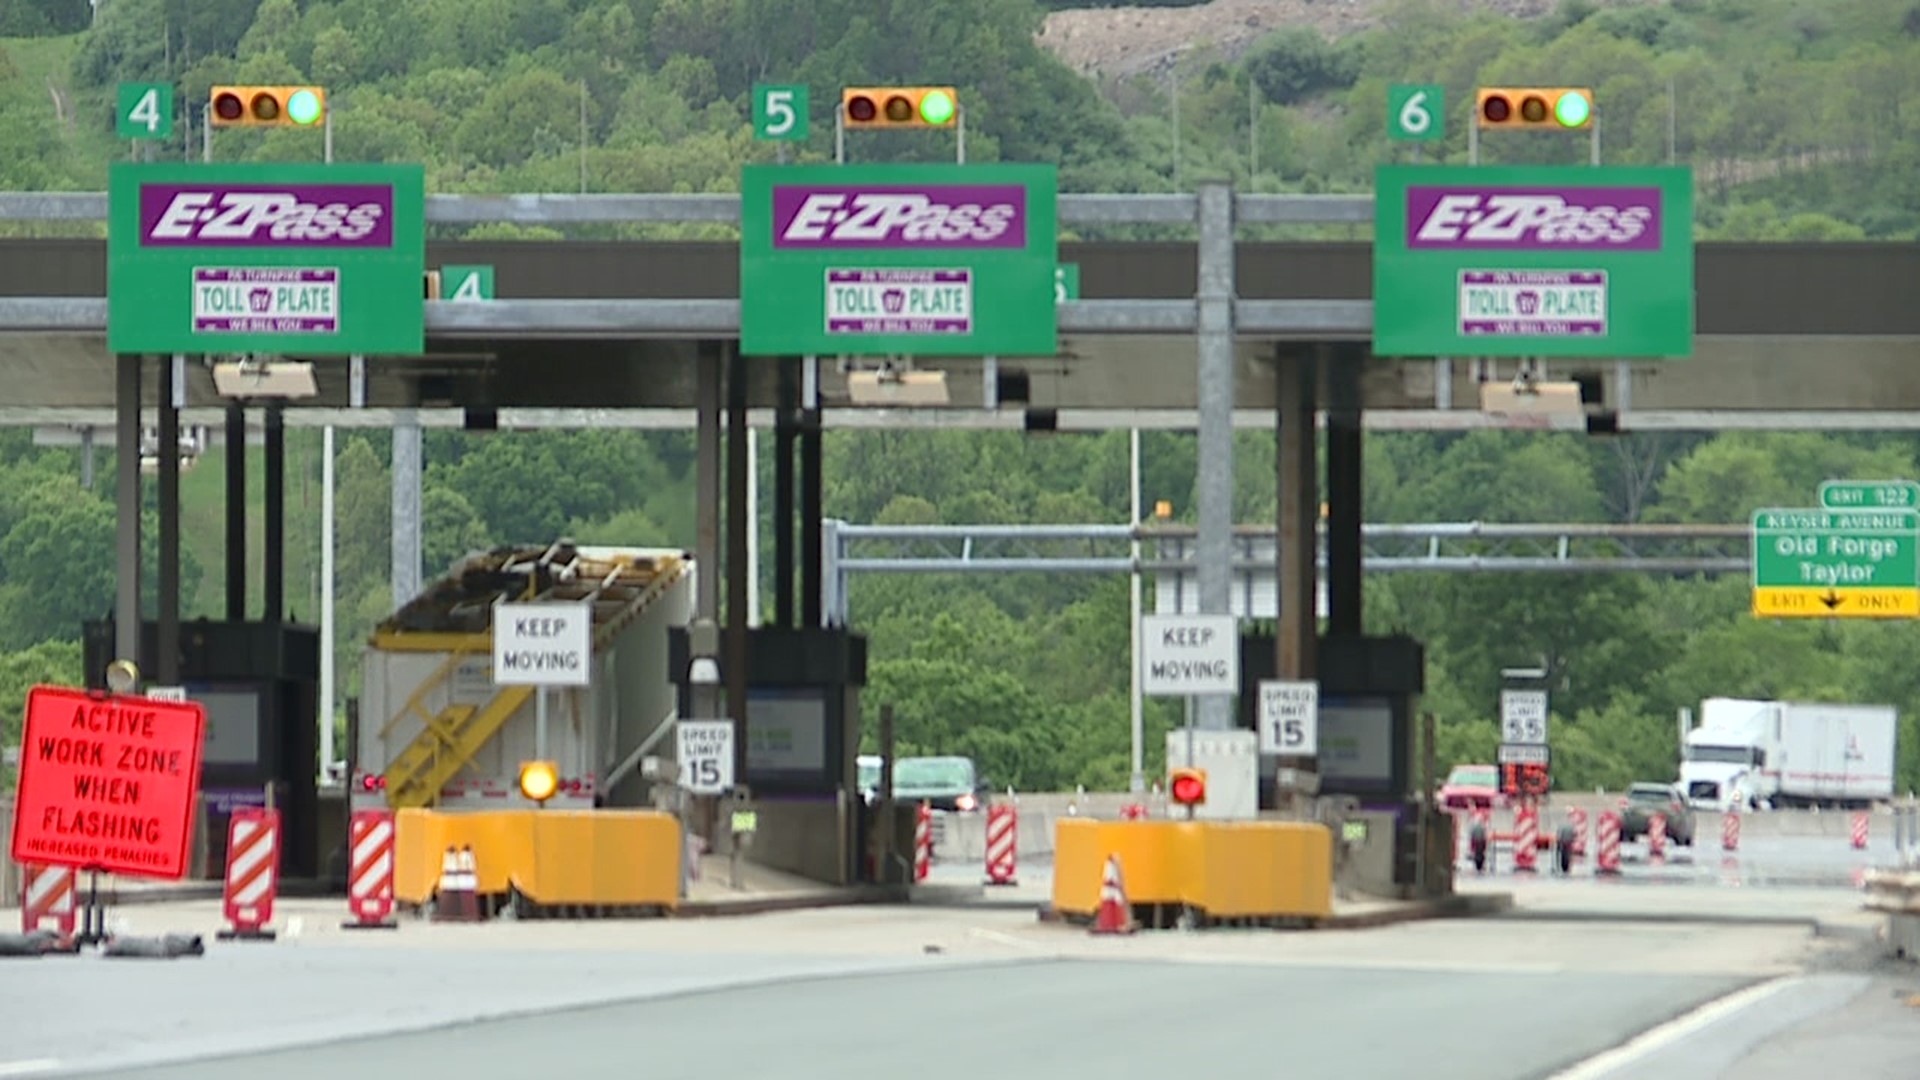 pa-turnpike-tolls-set-to-increase-45-percent-for-some-drivers-wnep